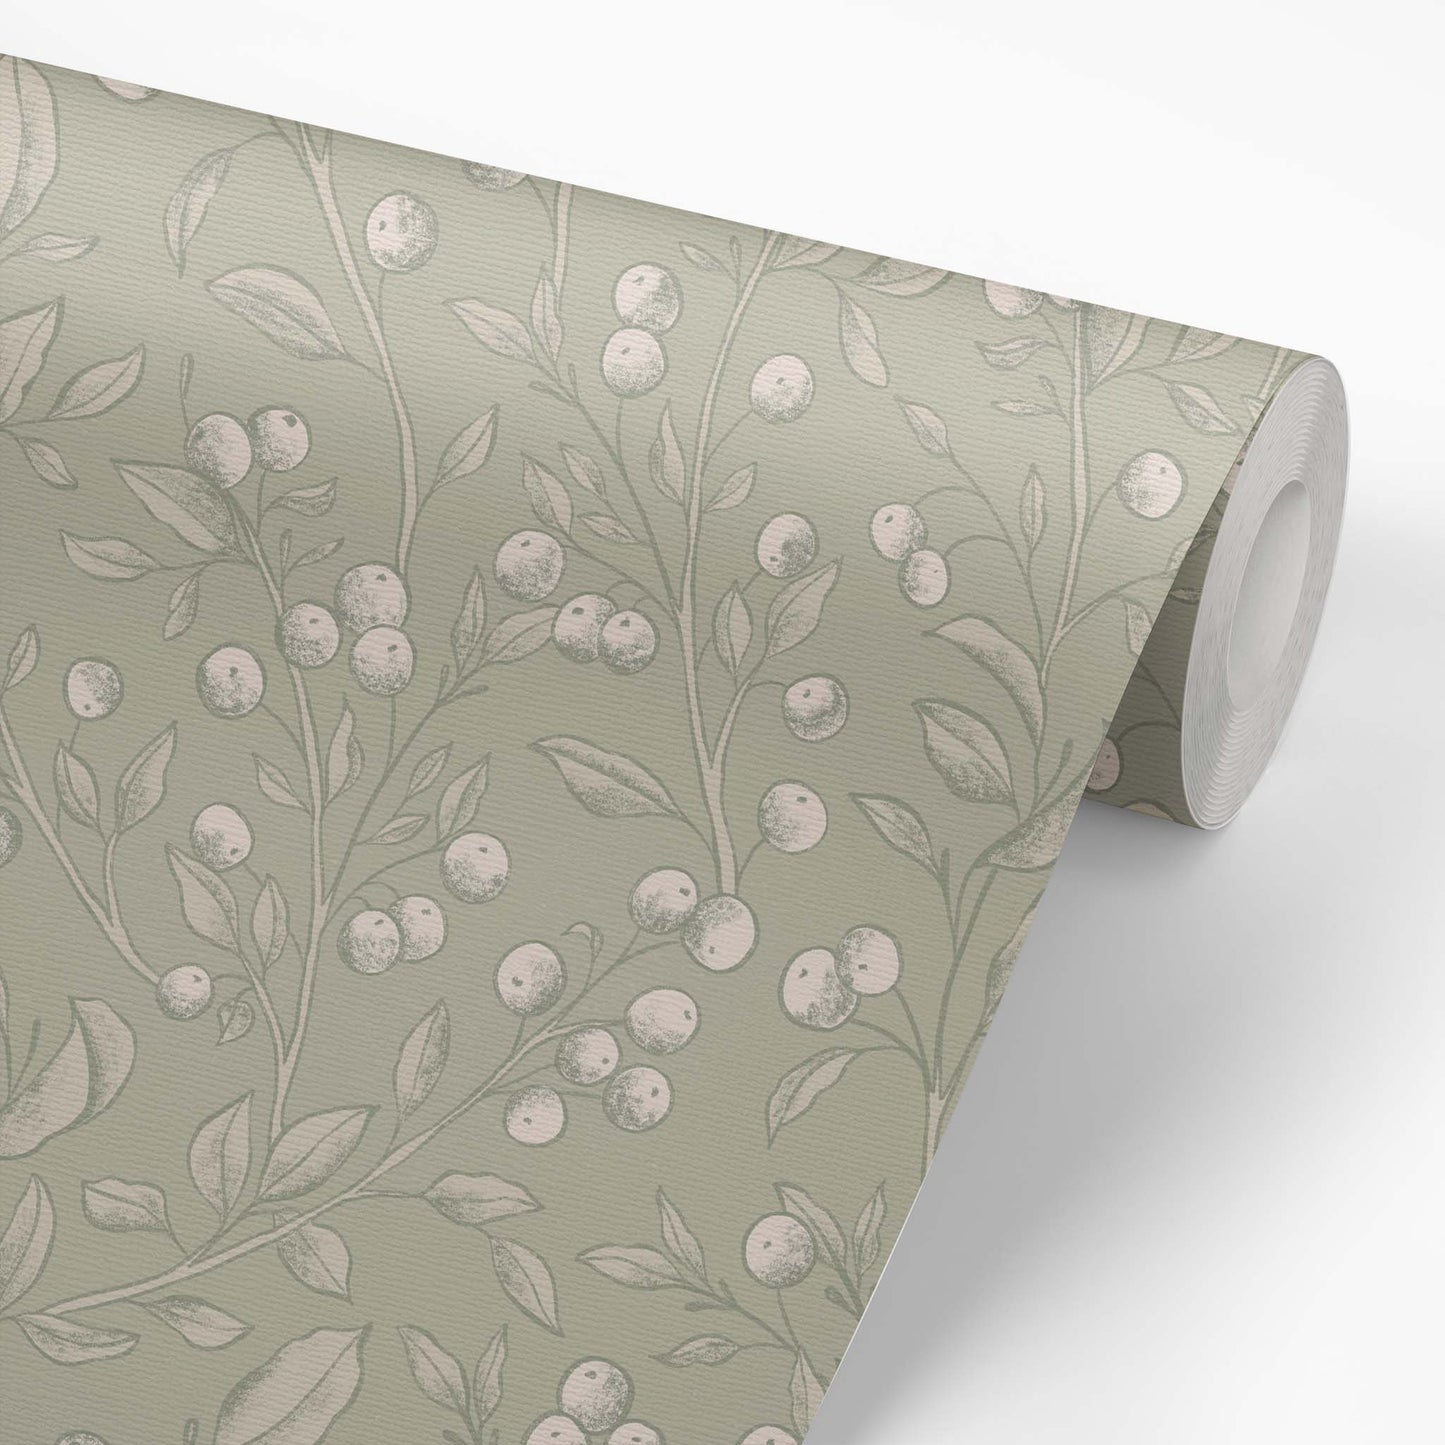 This preview is a wallpaper roll our Berries Wallpaper in Dry Sage is a peel and stick, removable wallpaper with hand-drawn sketched berries in dry sage and white by artist Mariah Cottrell.